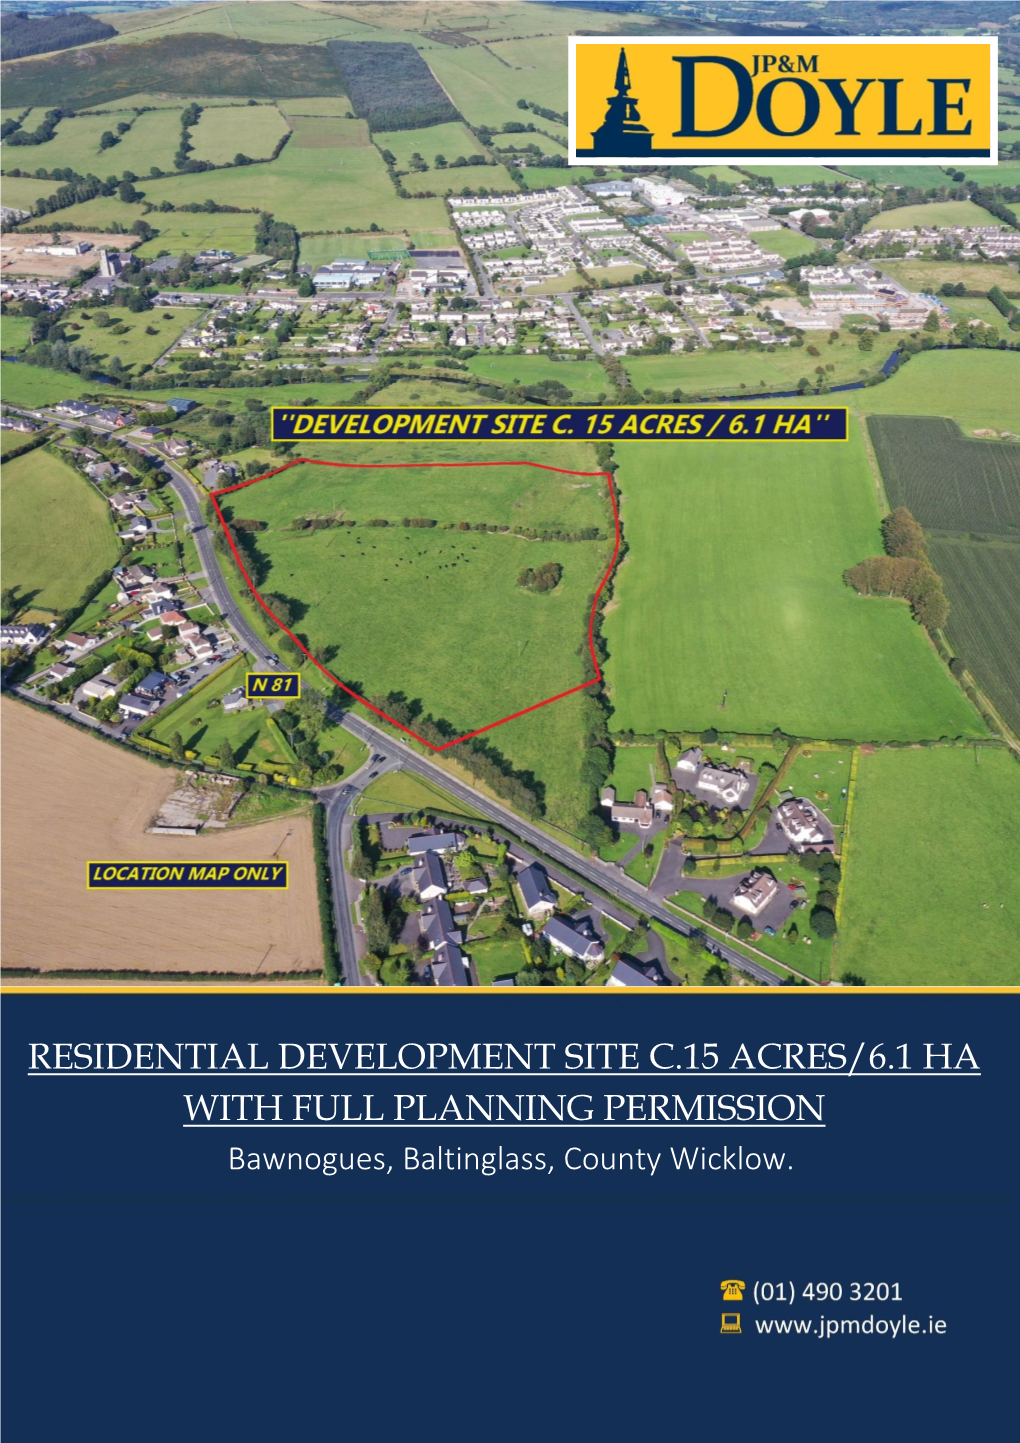 Residential Development Site C.15 Acres/6.1 Ha with Full Planning Permission